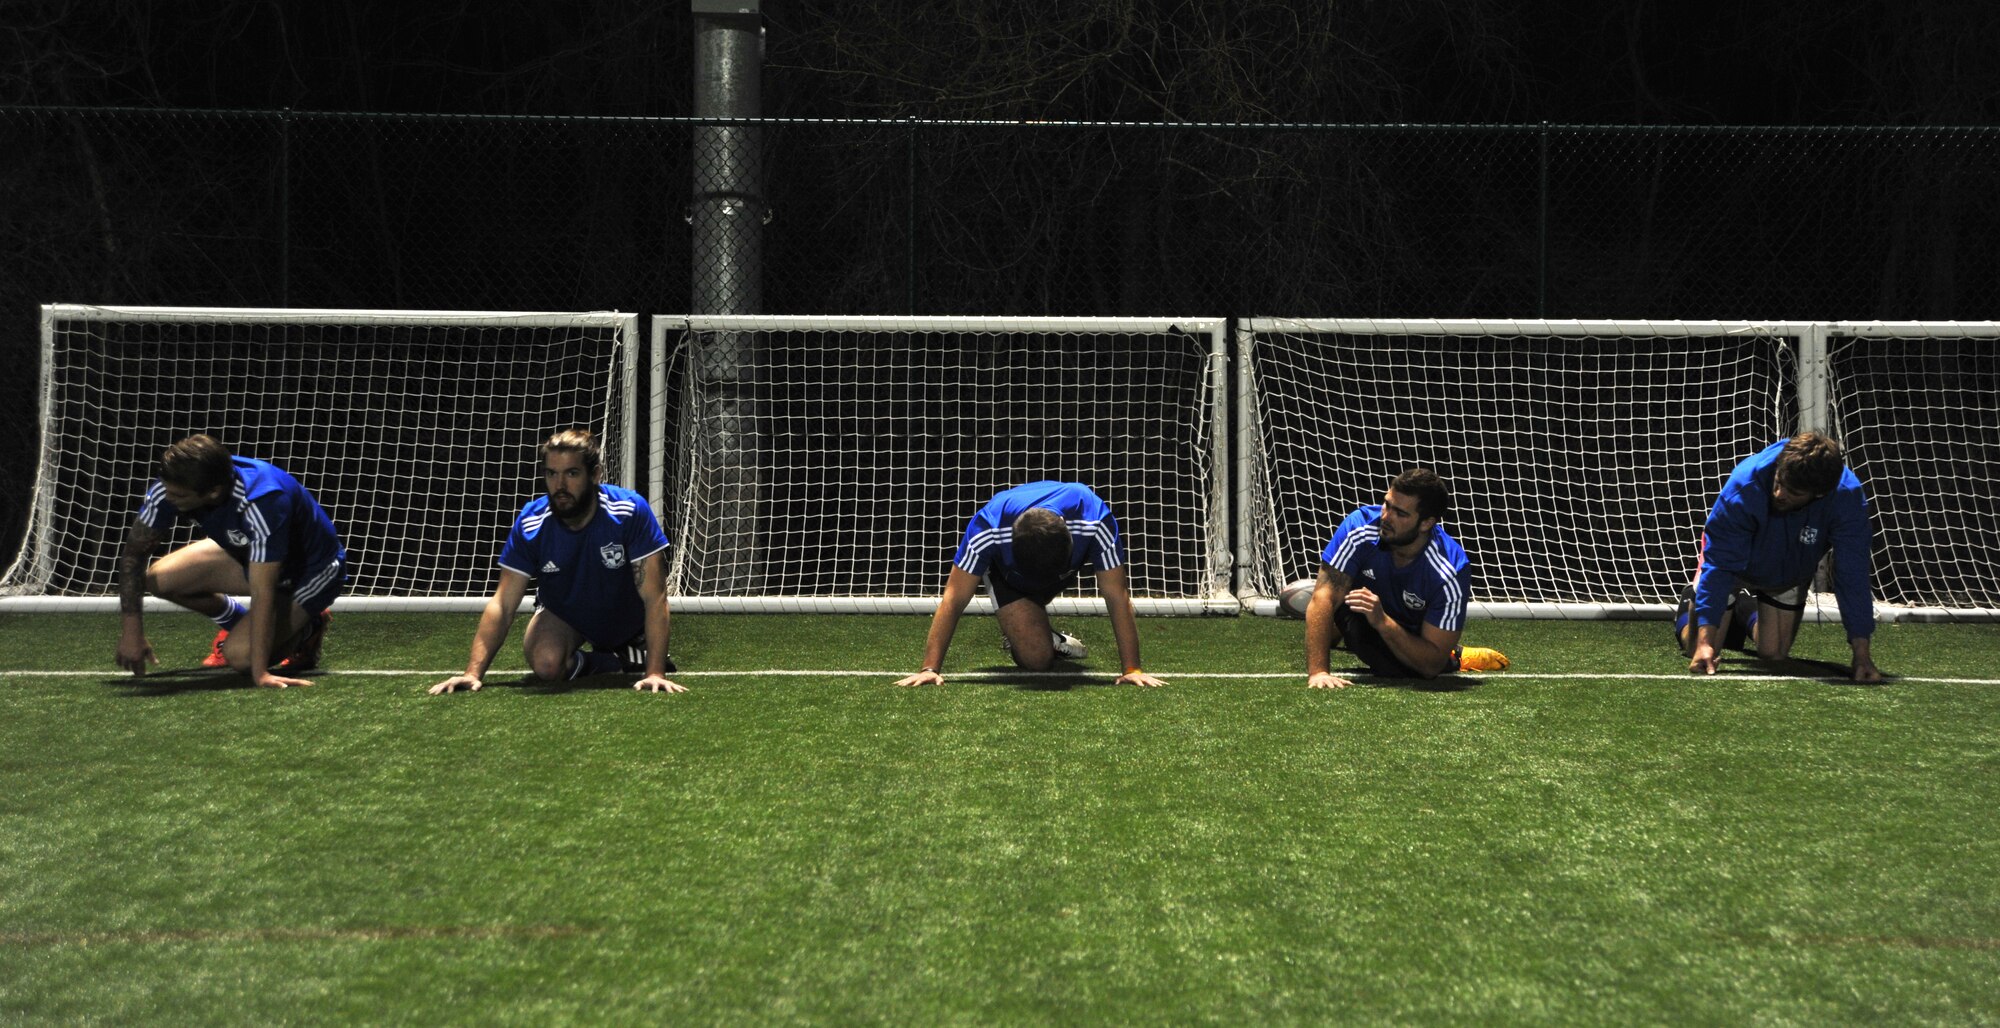 Players from the Kansas City Blues Rugby Club stretch before a two-hour practice in Kansas City, Mo., March 14, 2013. The variety of professions on this team, including lawyers, molecular biology engineers, and Soldiers and Airmen, is a testament to the widespread appeal of the sport. (U.S. Air Force photo by Senior Airman Brigitte N. Brantley/Released)